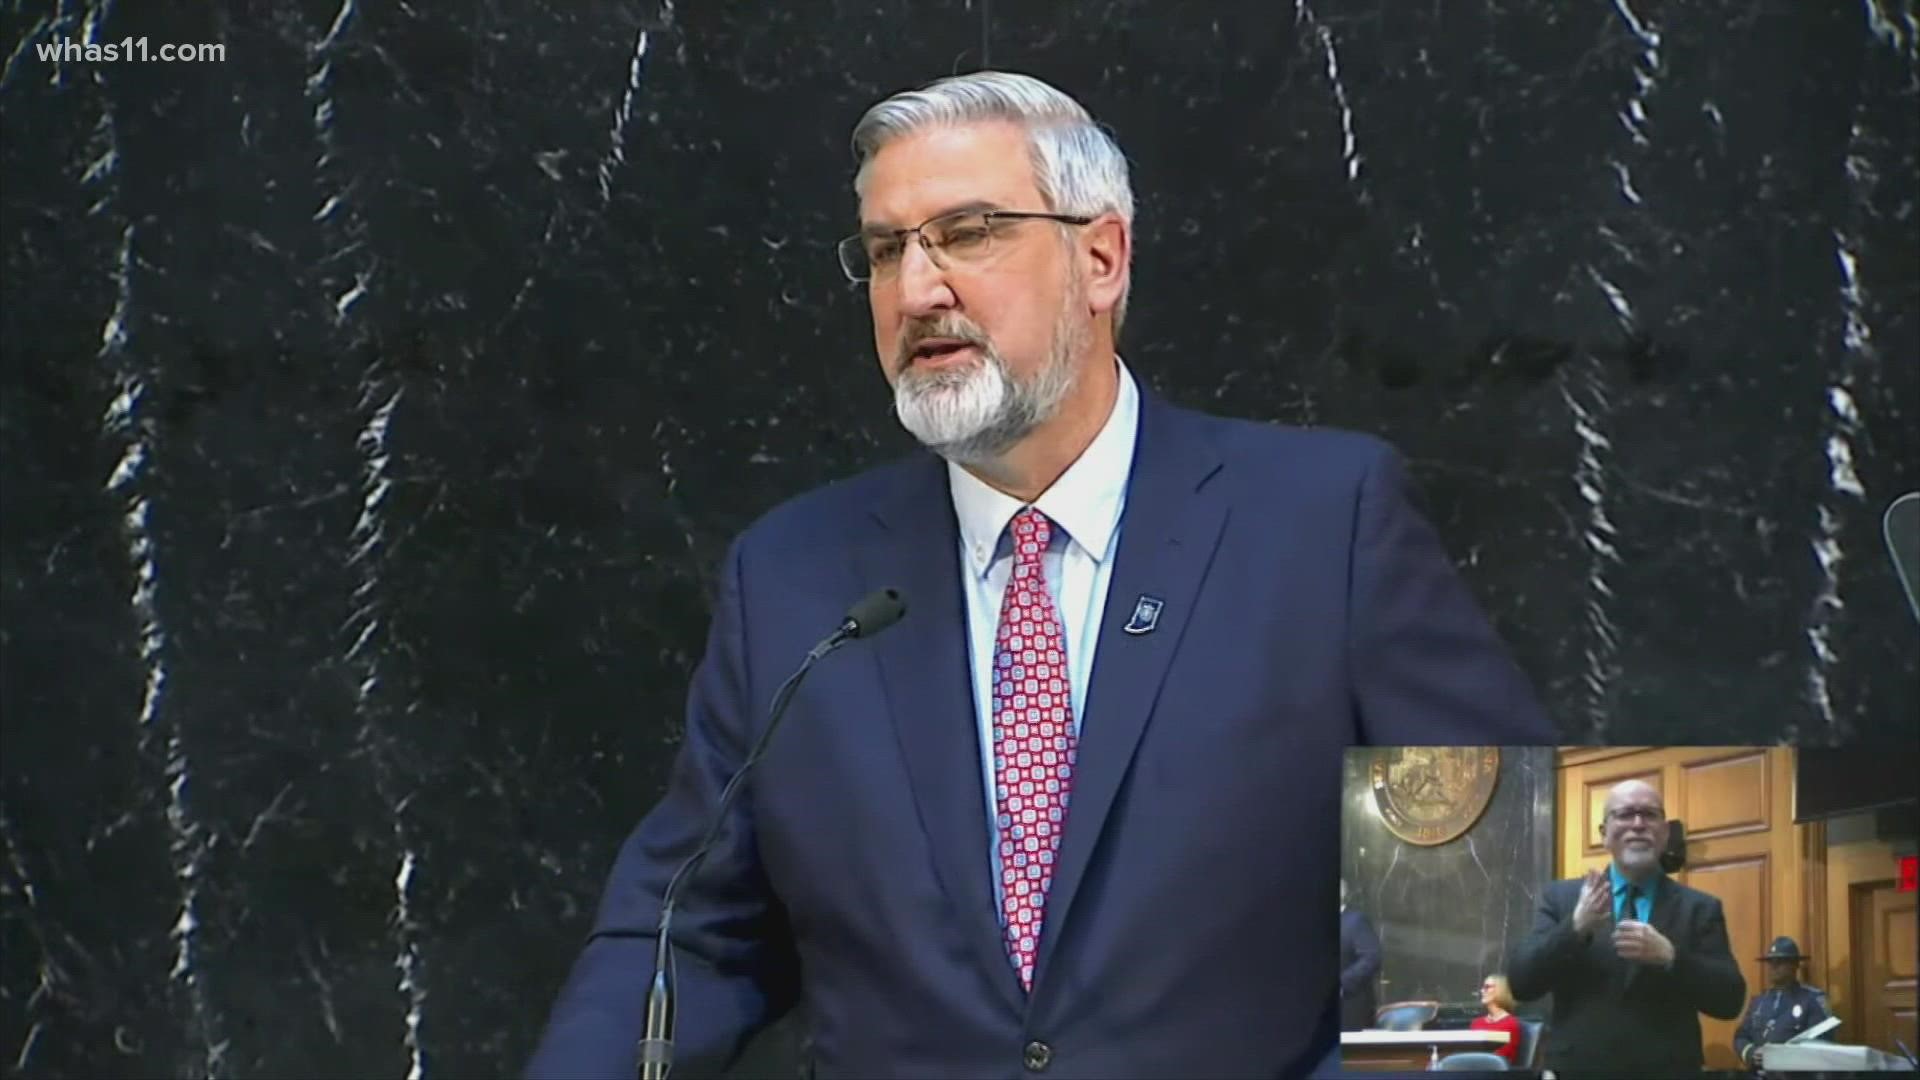 Gov. Eric Holcomb says Indiana is seeing its lowest unemployment rate in 21 years.